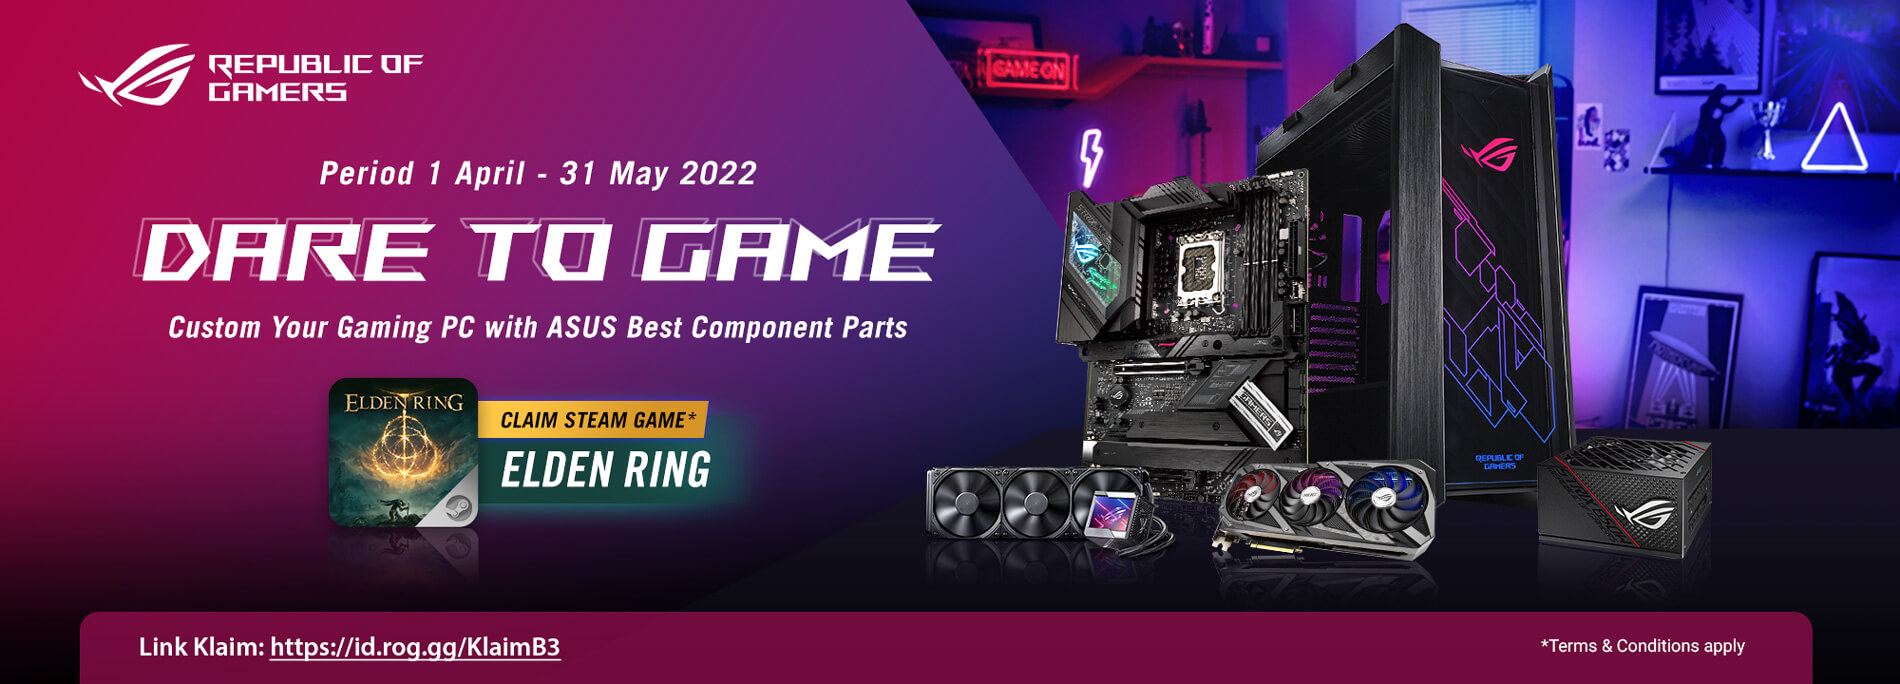 DARE TO GAME - Custom Your Gaming PC with ASUS Best Component Parts